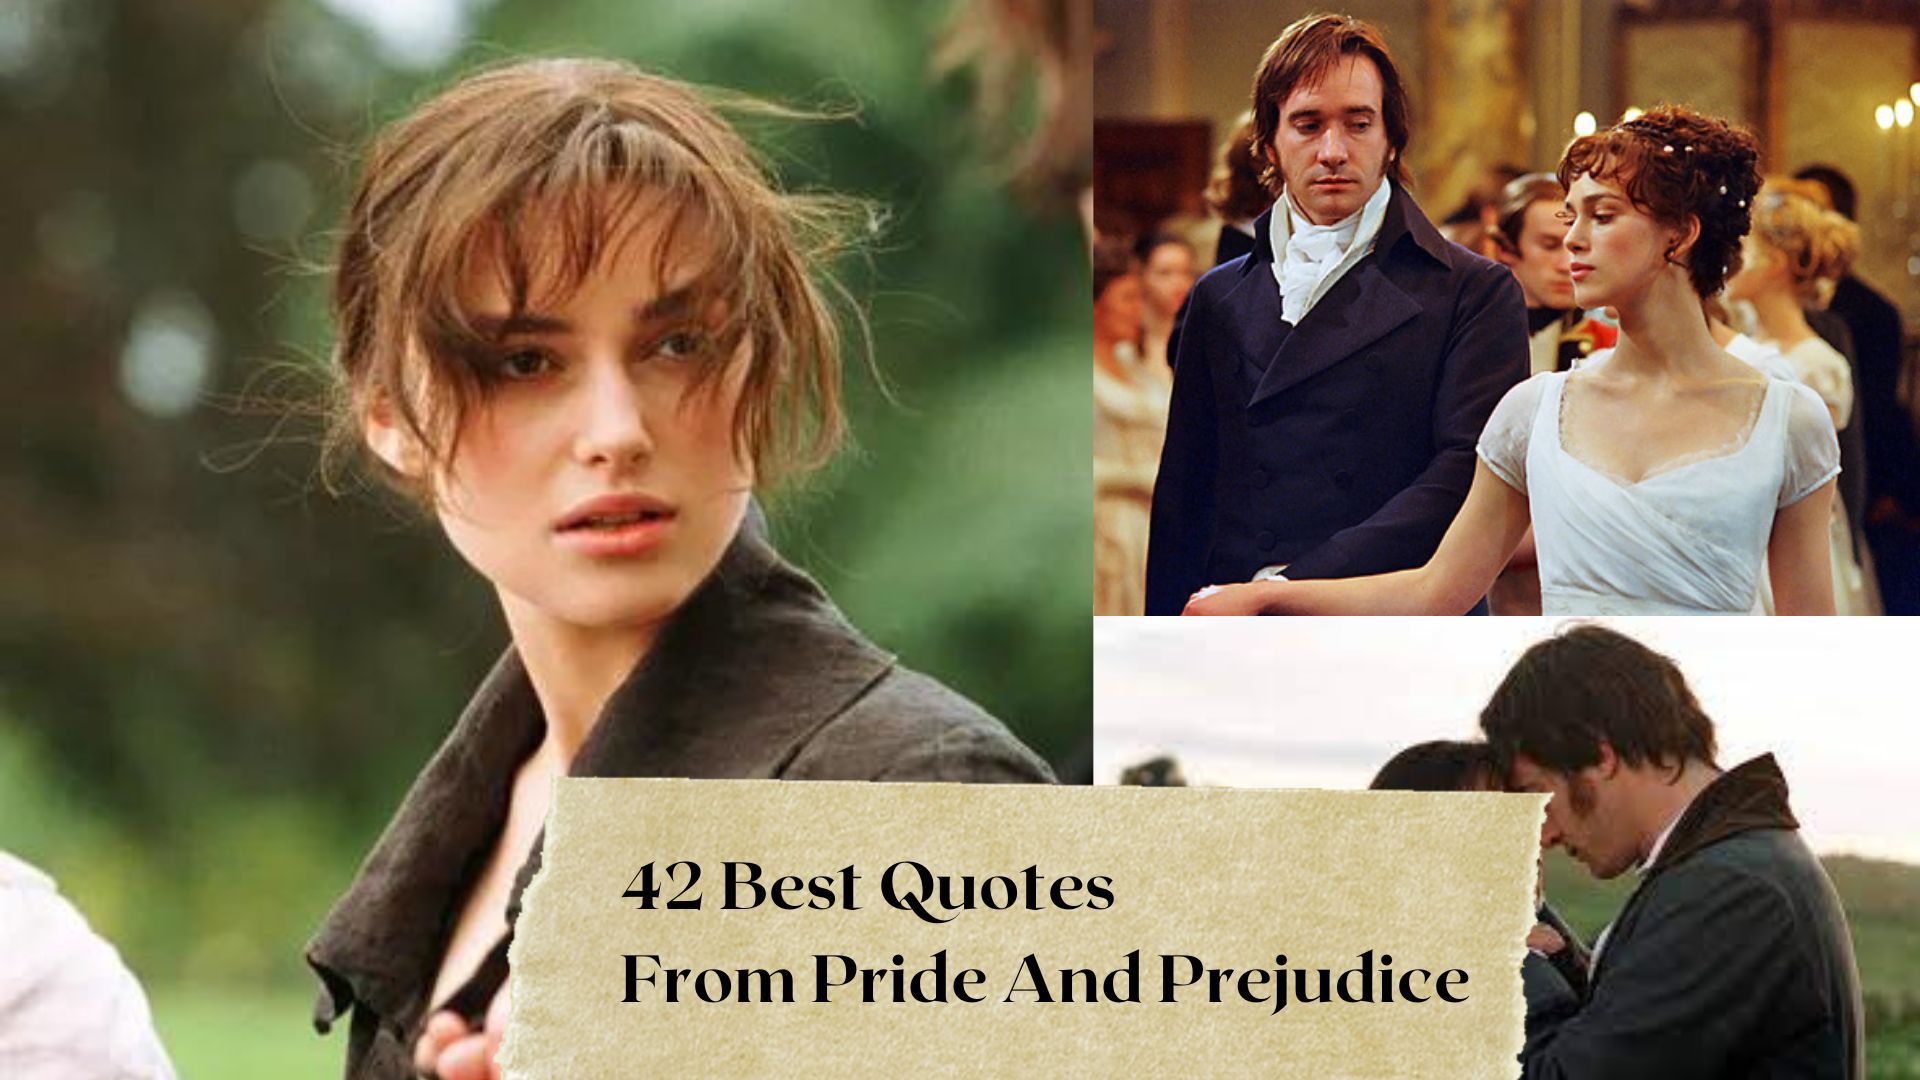 42 Best Quotes From Pride And Prejudice